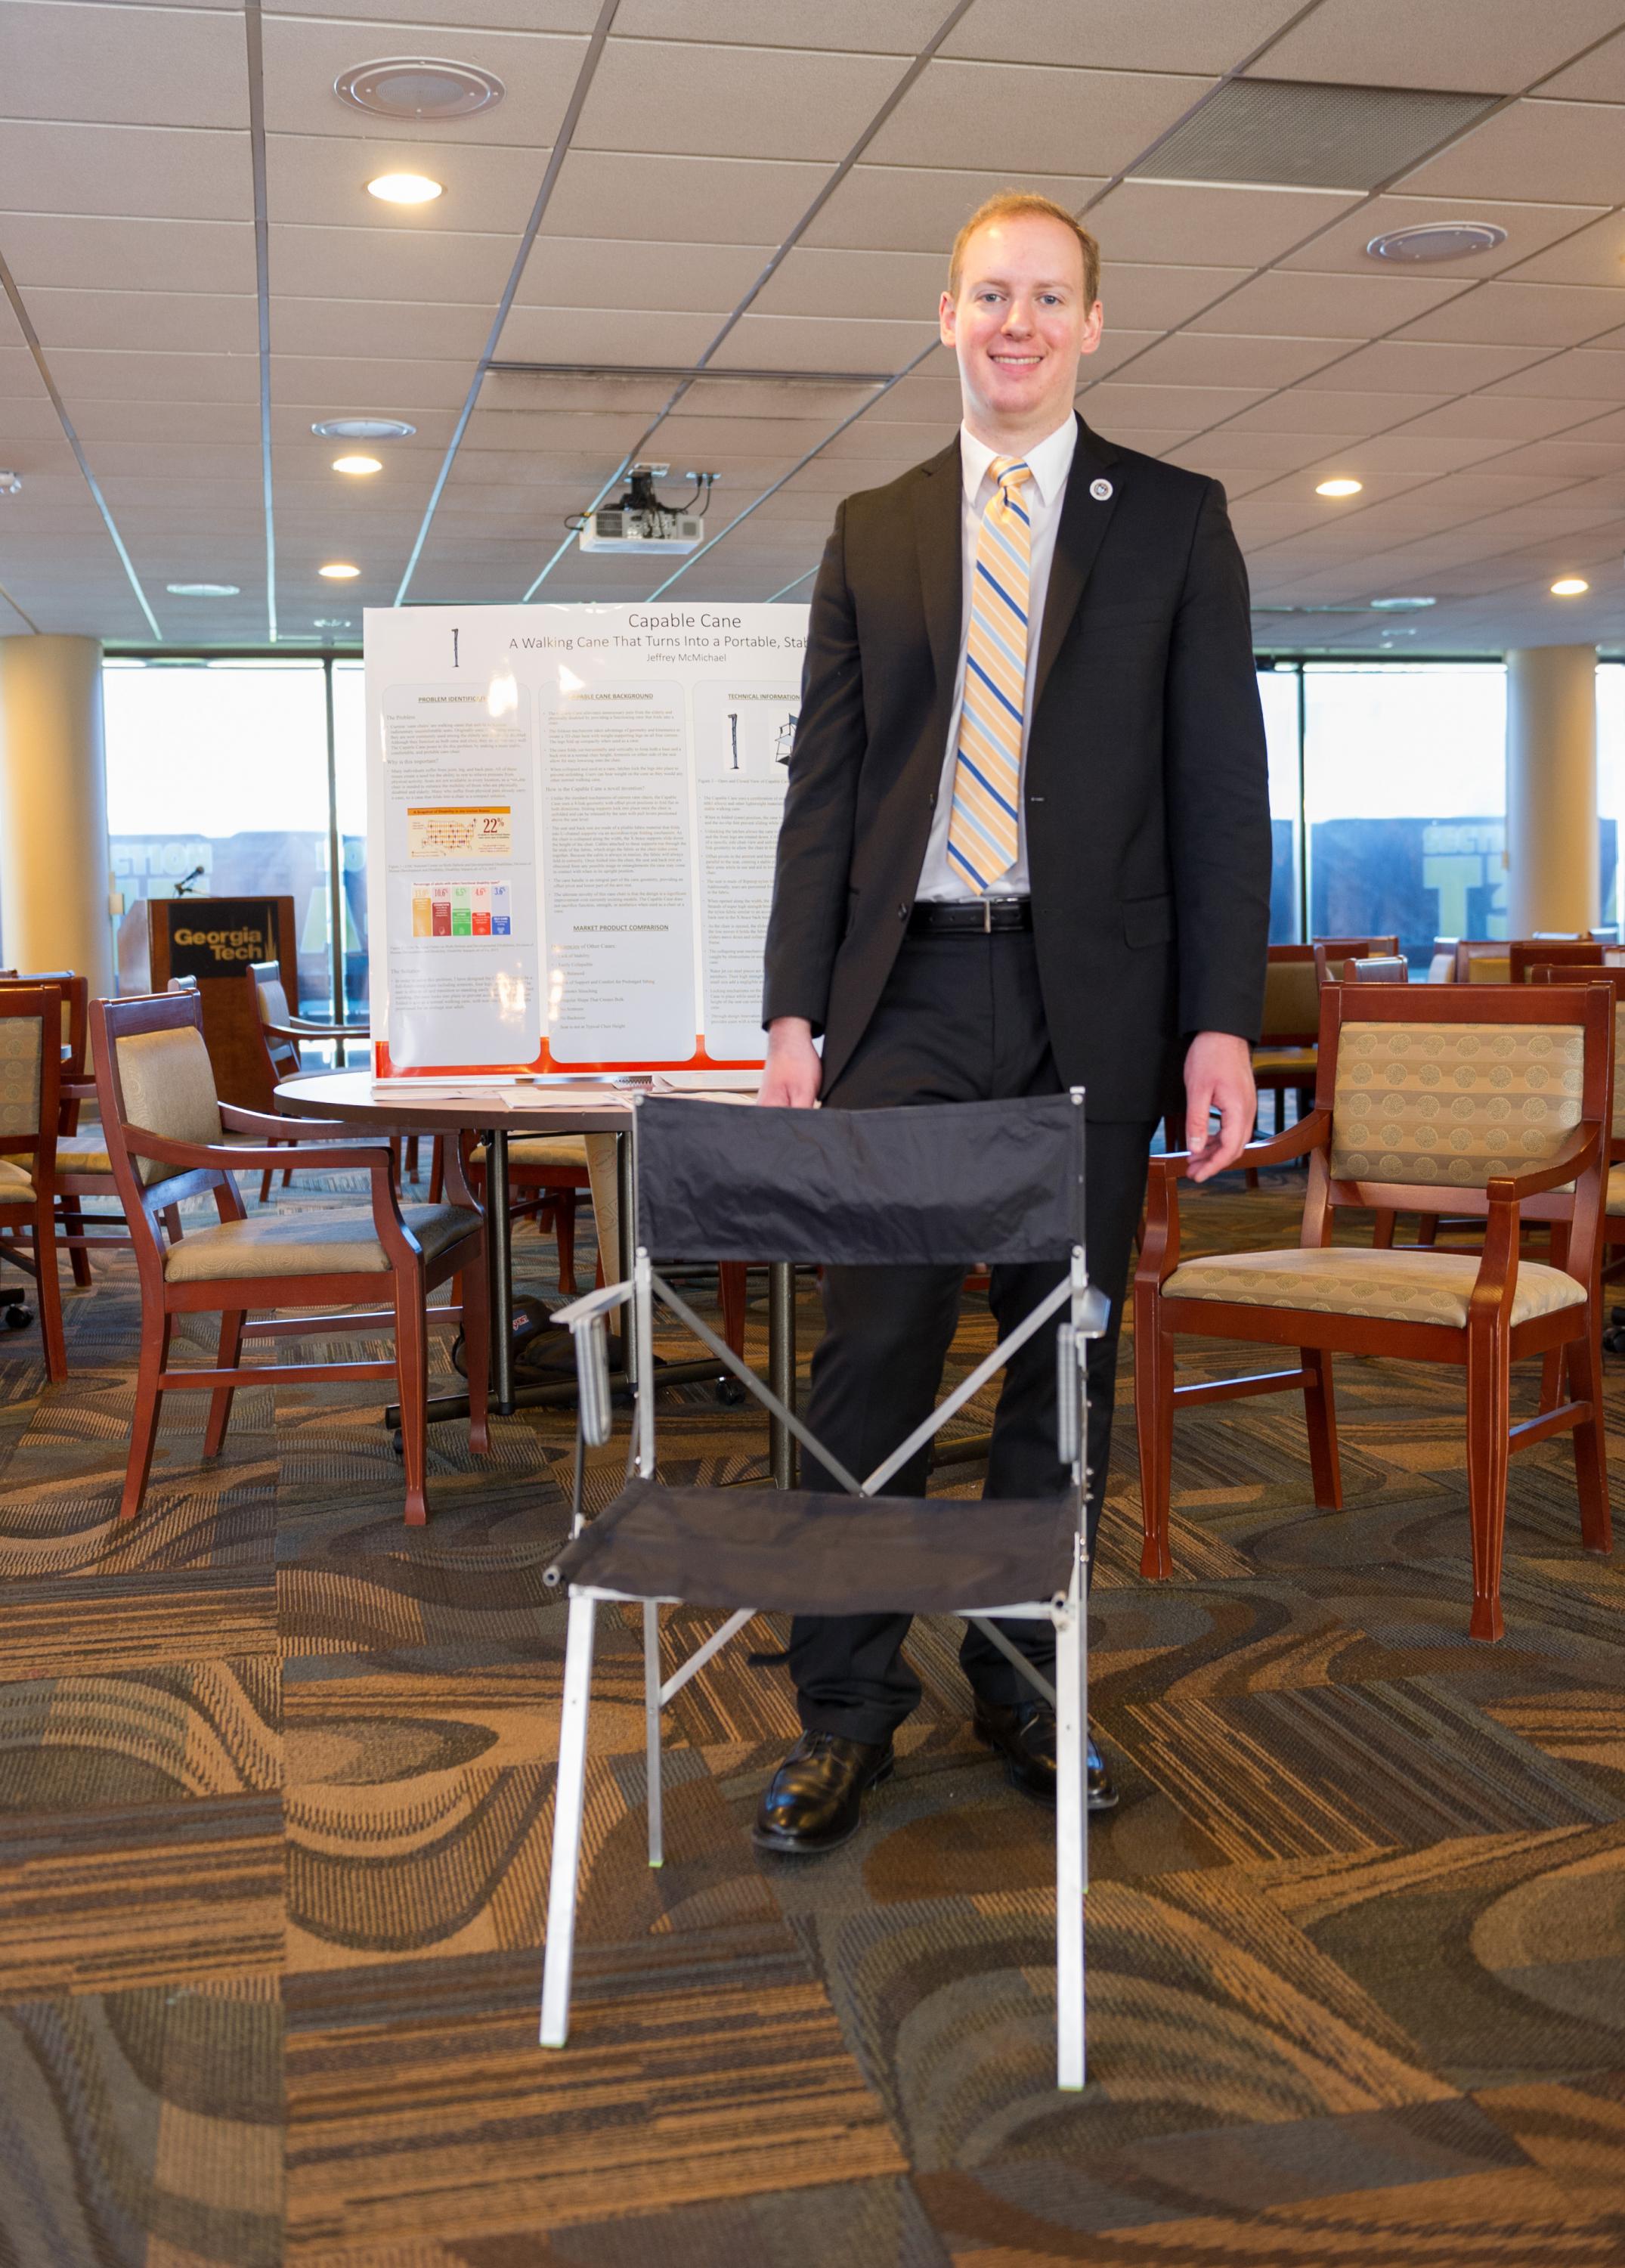 Jeffrey McMichael, a student in the George W. Woodruff School of Mechanical Engineering, invented the Capable Cane, a walking cane that unfolds into a portable, stable chair. His invention is one of six competing for Georgia Tech’s 2017 InVenture Prize.  

Photo by Rob Felt.